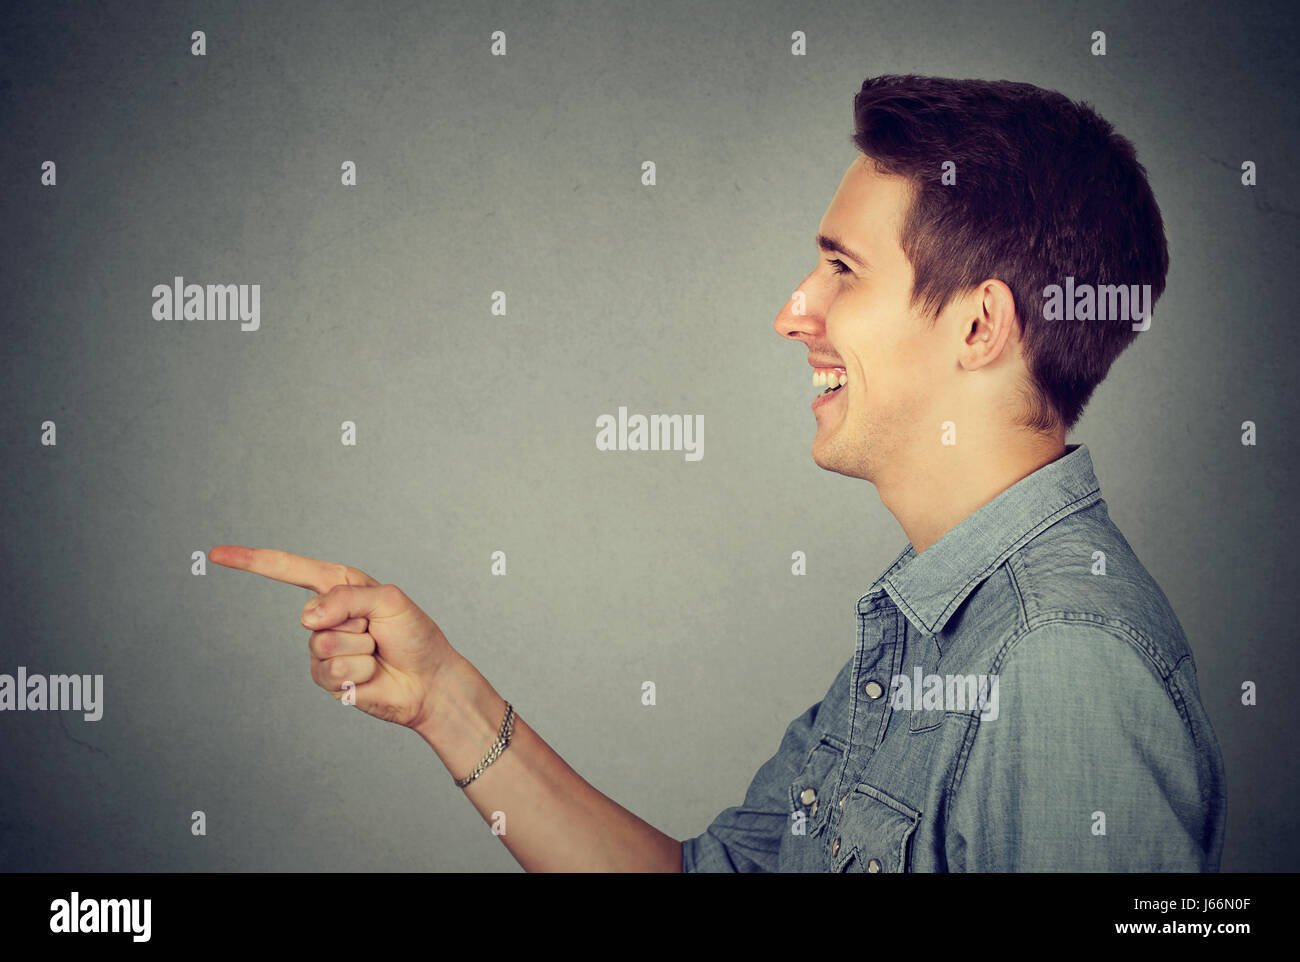 Side profile of a laughing young man Stock Photo